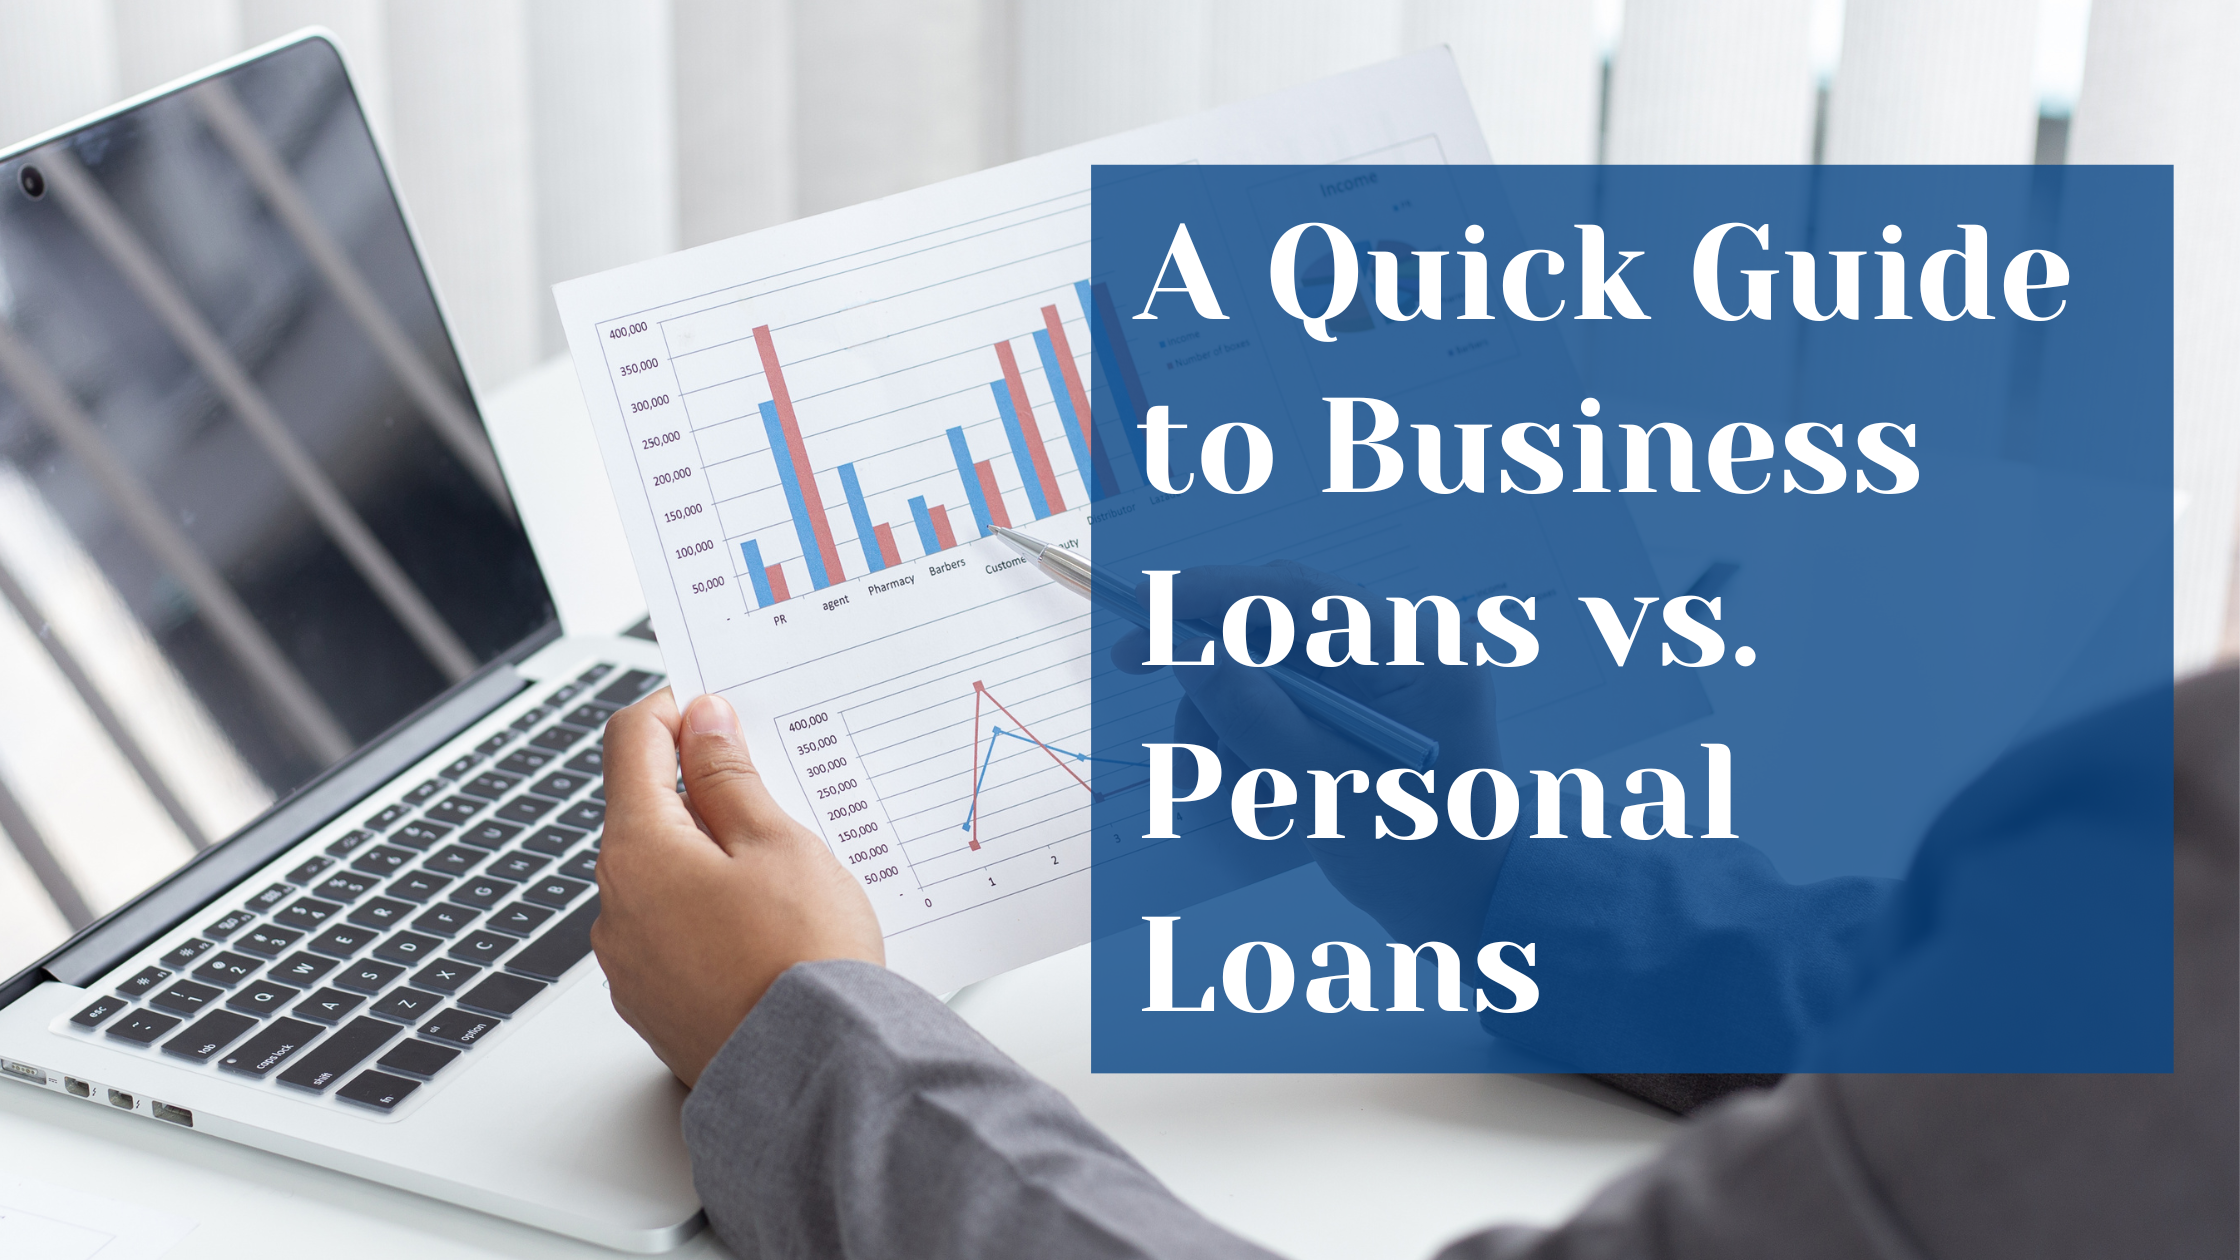 A Quick Guide to Business Loans vs. Personal Loans